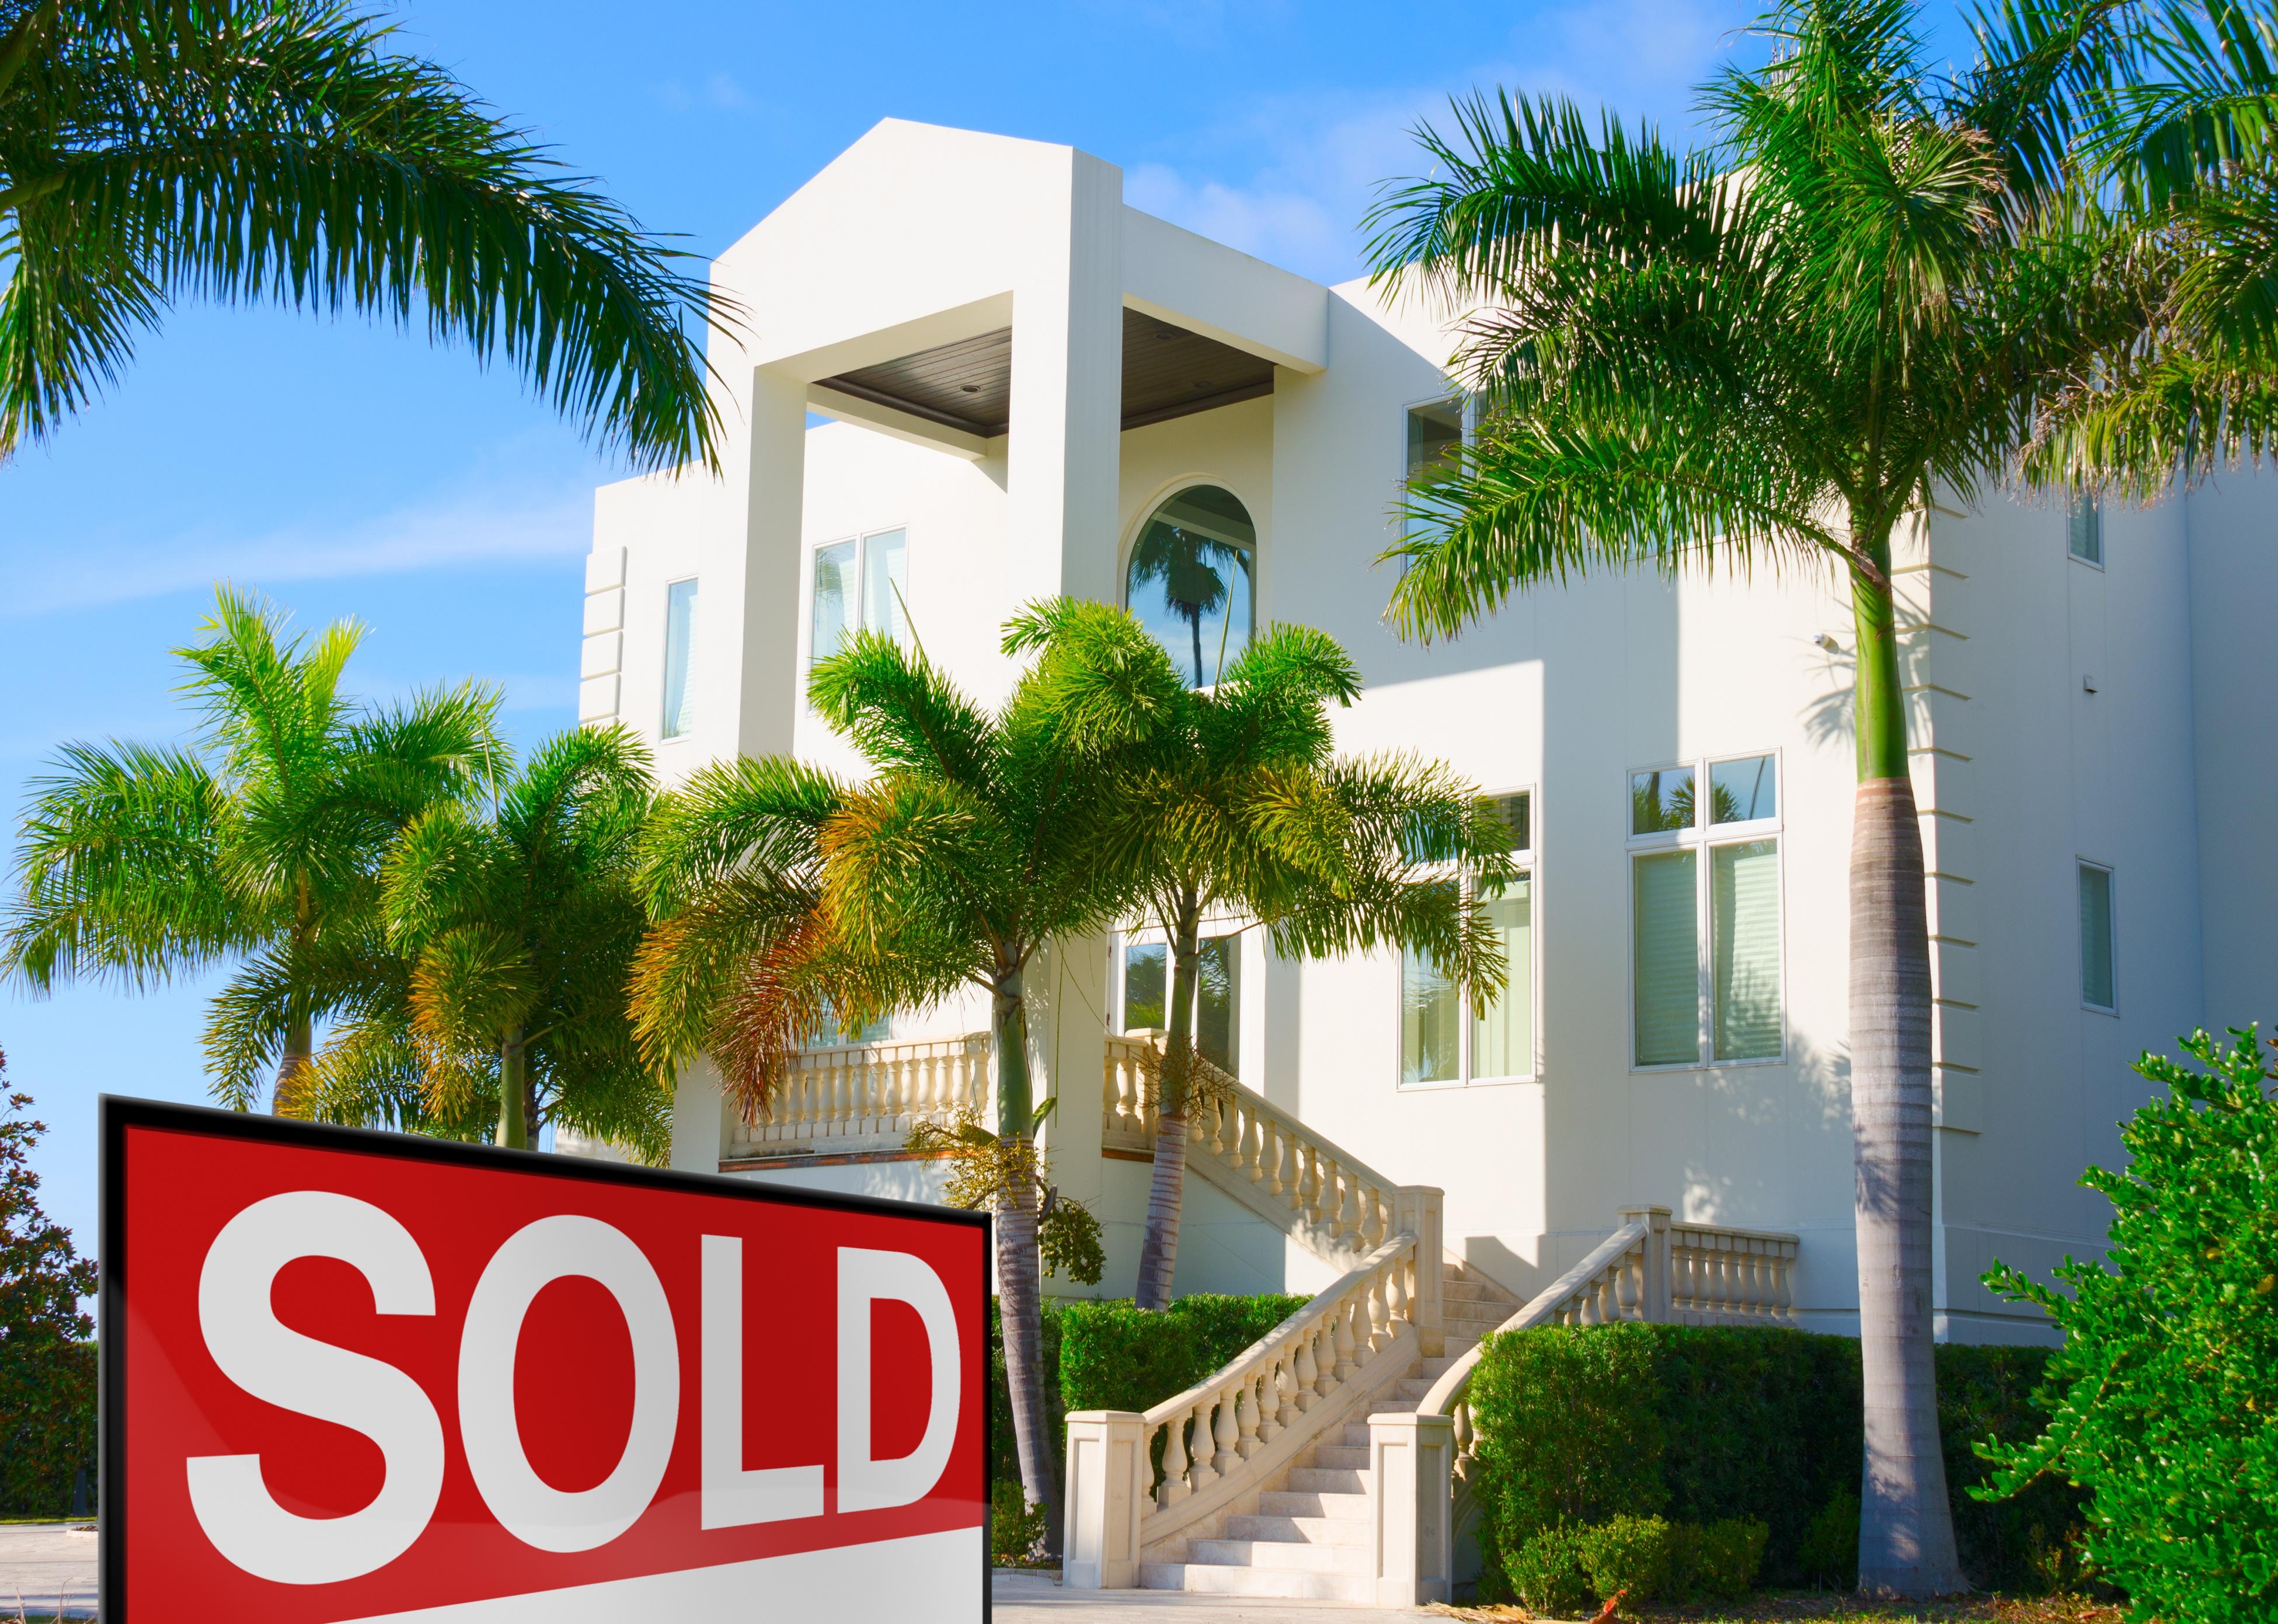 Luxury residential home with stairway and palm trees with a sold sign in the yard.